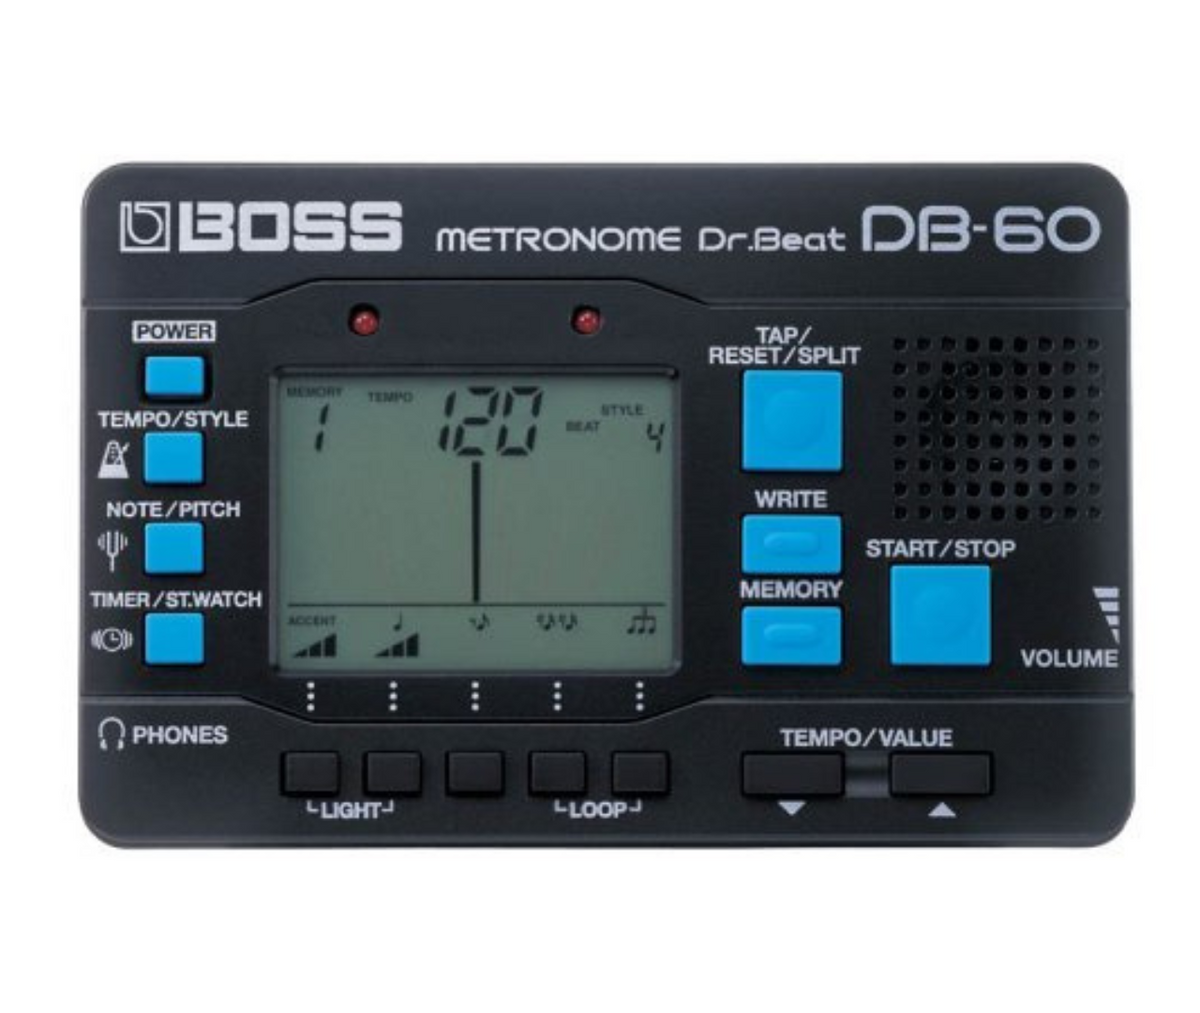 BOSS DB-60 Dr. Beat Best Metronome Beat Counter Portable Timekeeper with Note-Mixing and Memory Function and Tuning